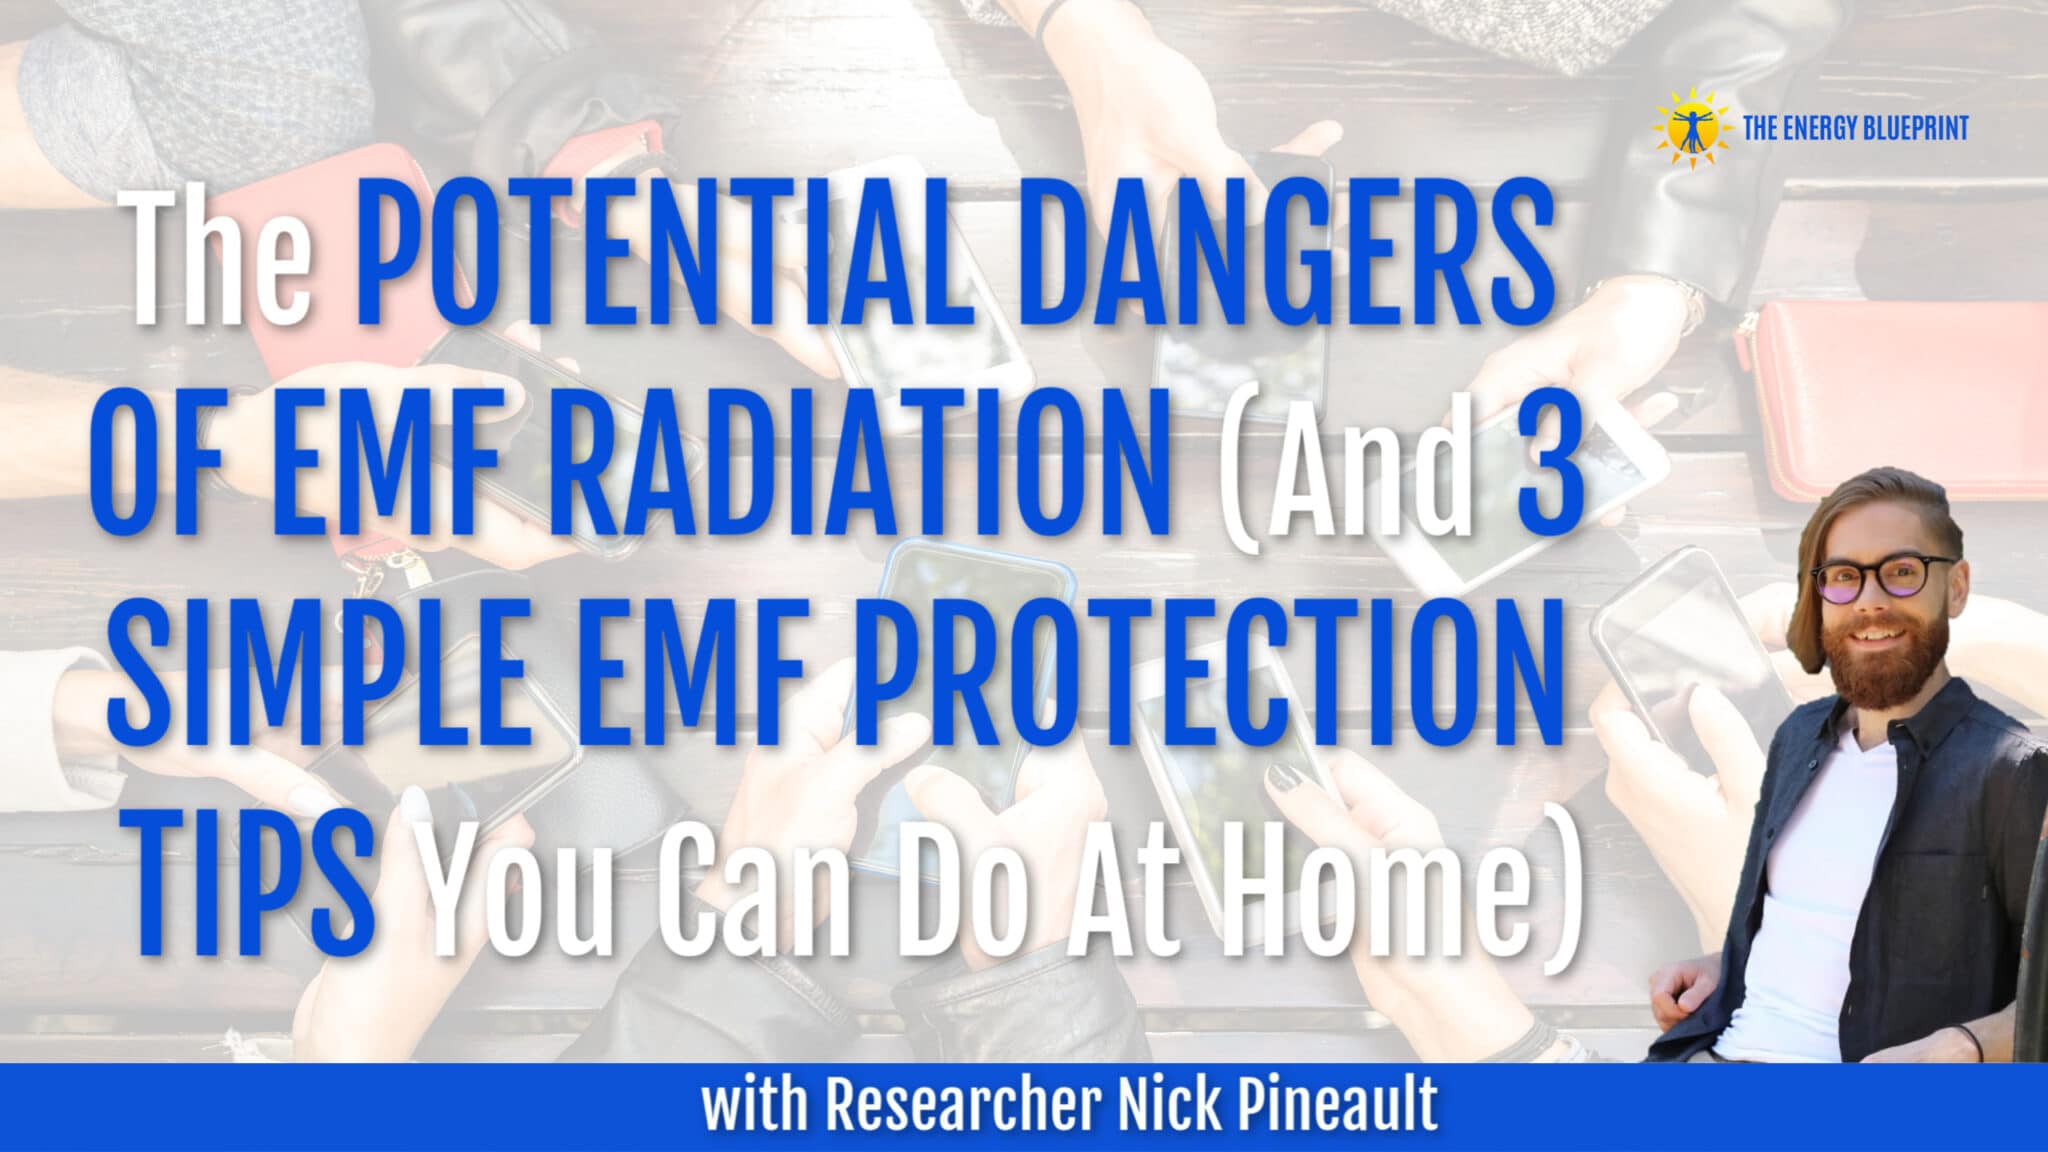 The potential dangers of EMF radiation and 3 simple EMF protection tips you can do at home